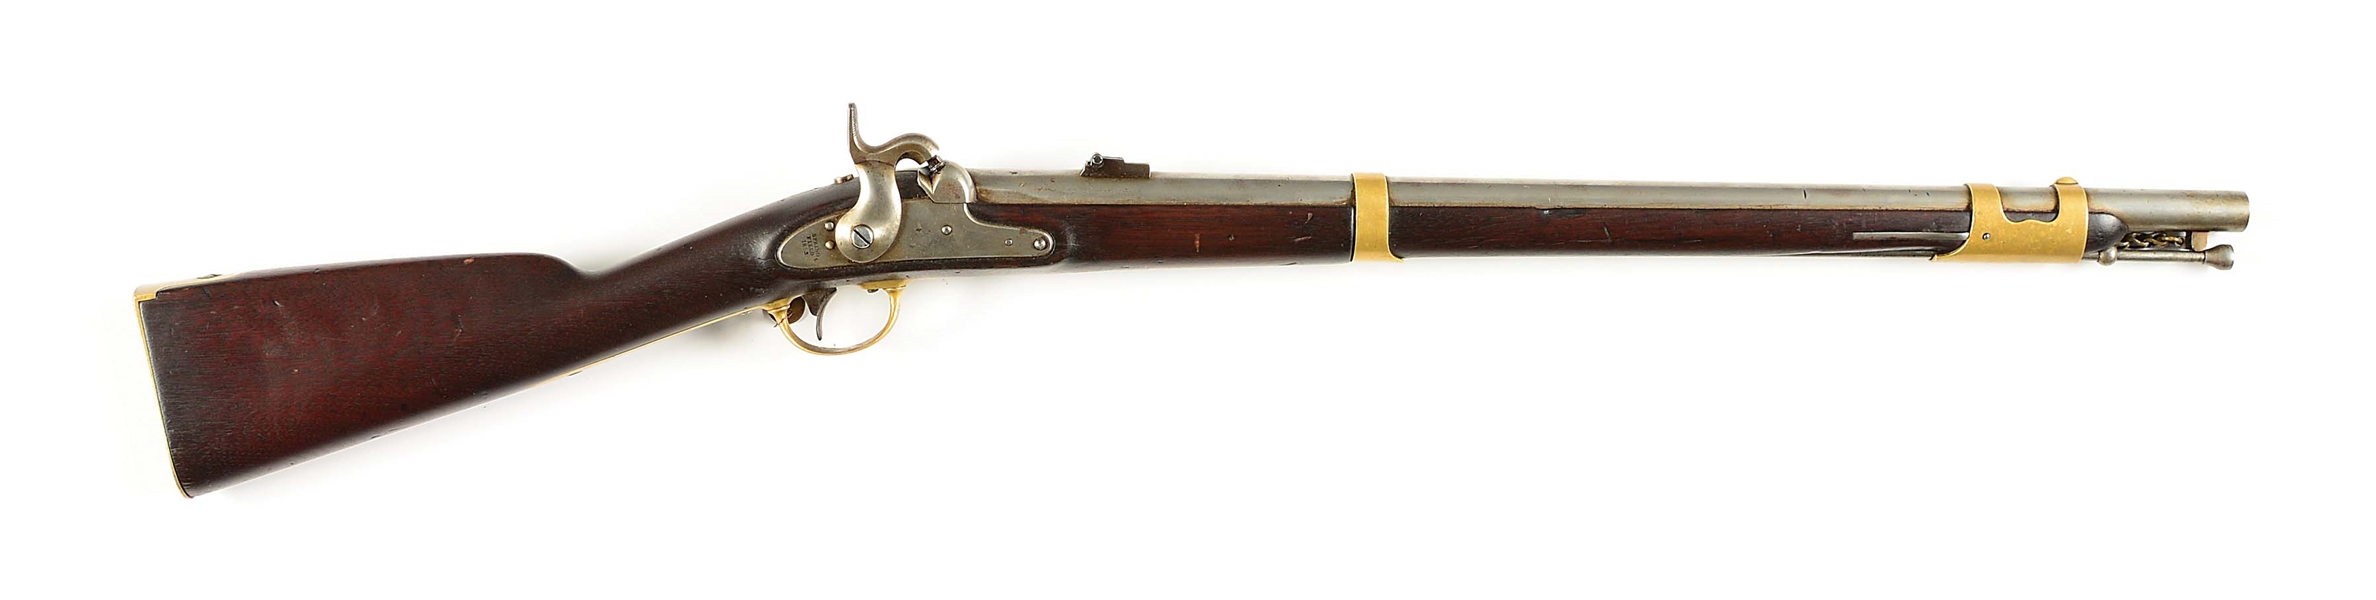 (A) RARE SPRINGFIELD MODEL 1847 CAVALRY RIFLED MUSKETOON WITH CHAIN RETAINED RAMROD, DATED 1853.